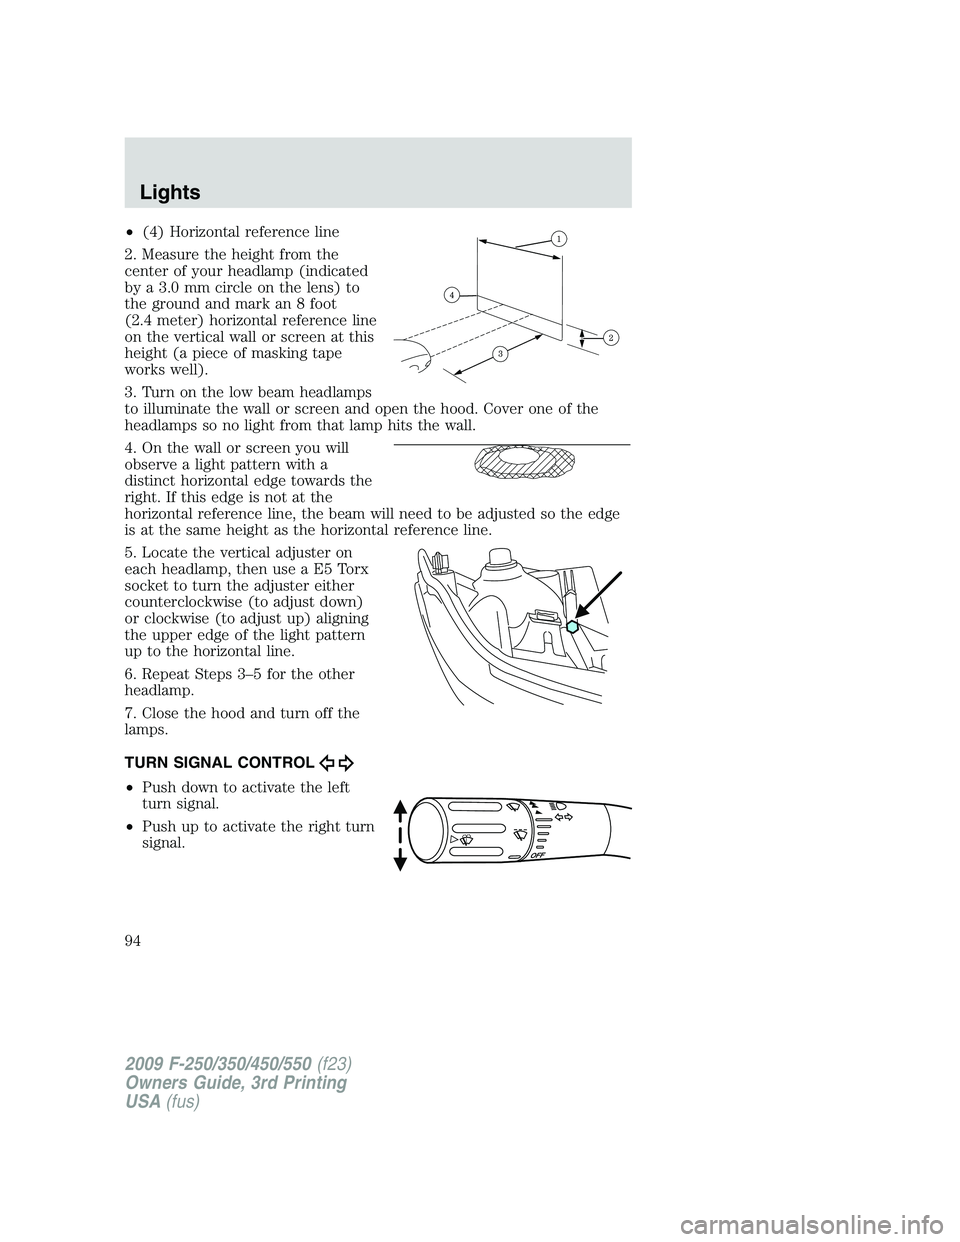 FORD F250 2009  Owners Manual •(4) Horizontal reference line
2. Measure the height from the
center of your headlamp (indicated
by a 3.0 mm circle on the lens) to
the ground and mark an 8 foot
(2.4 meter) horizontal reference lin